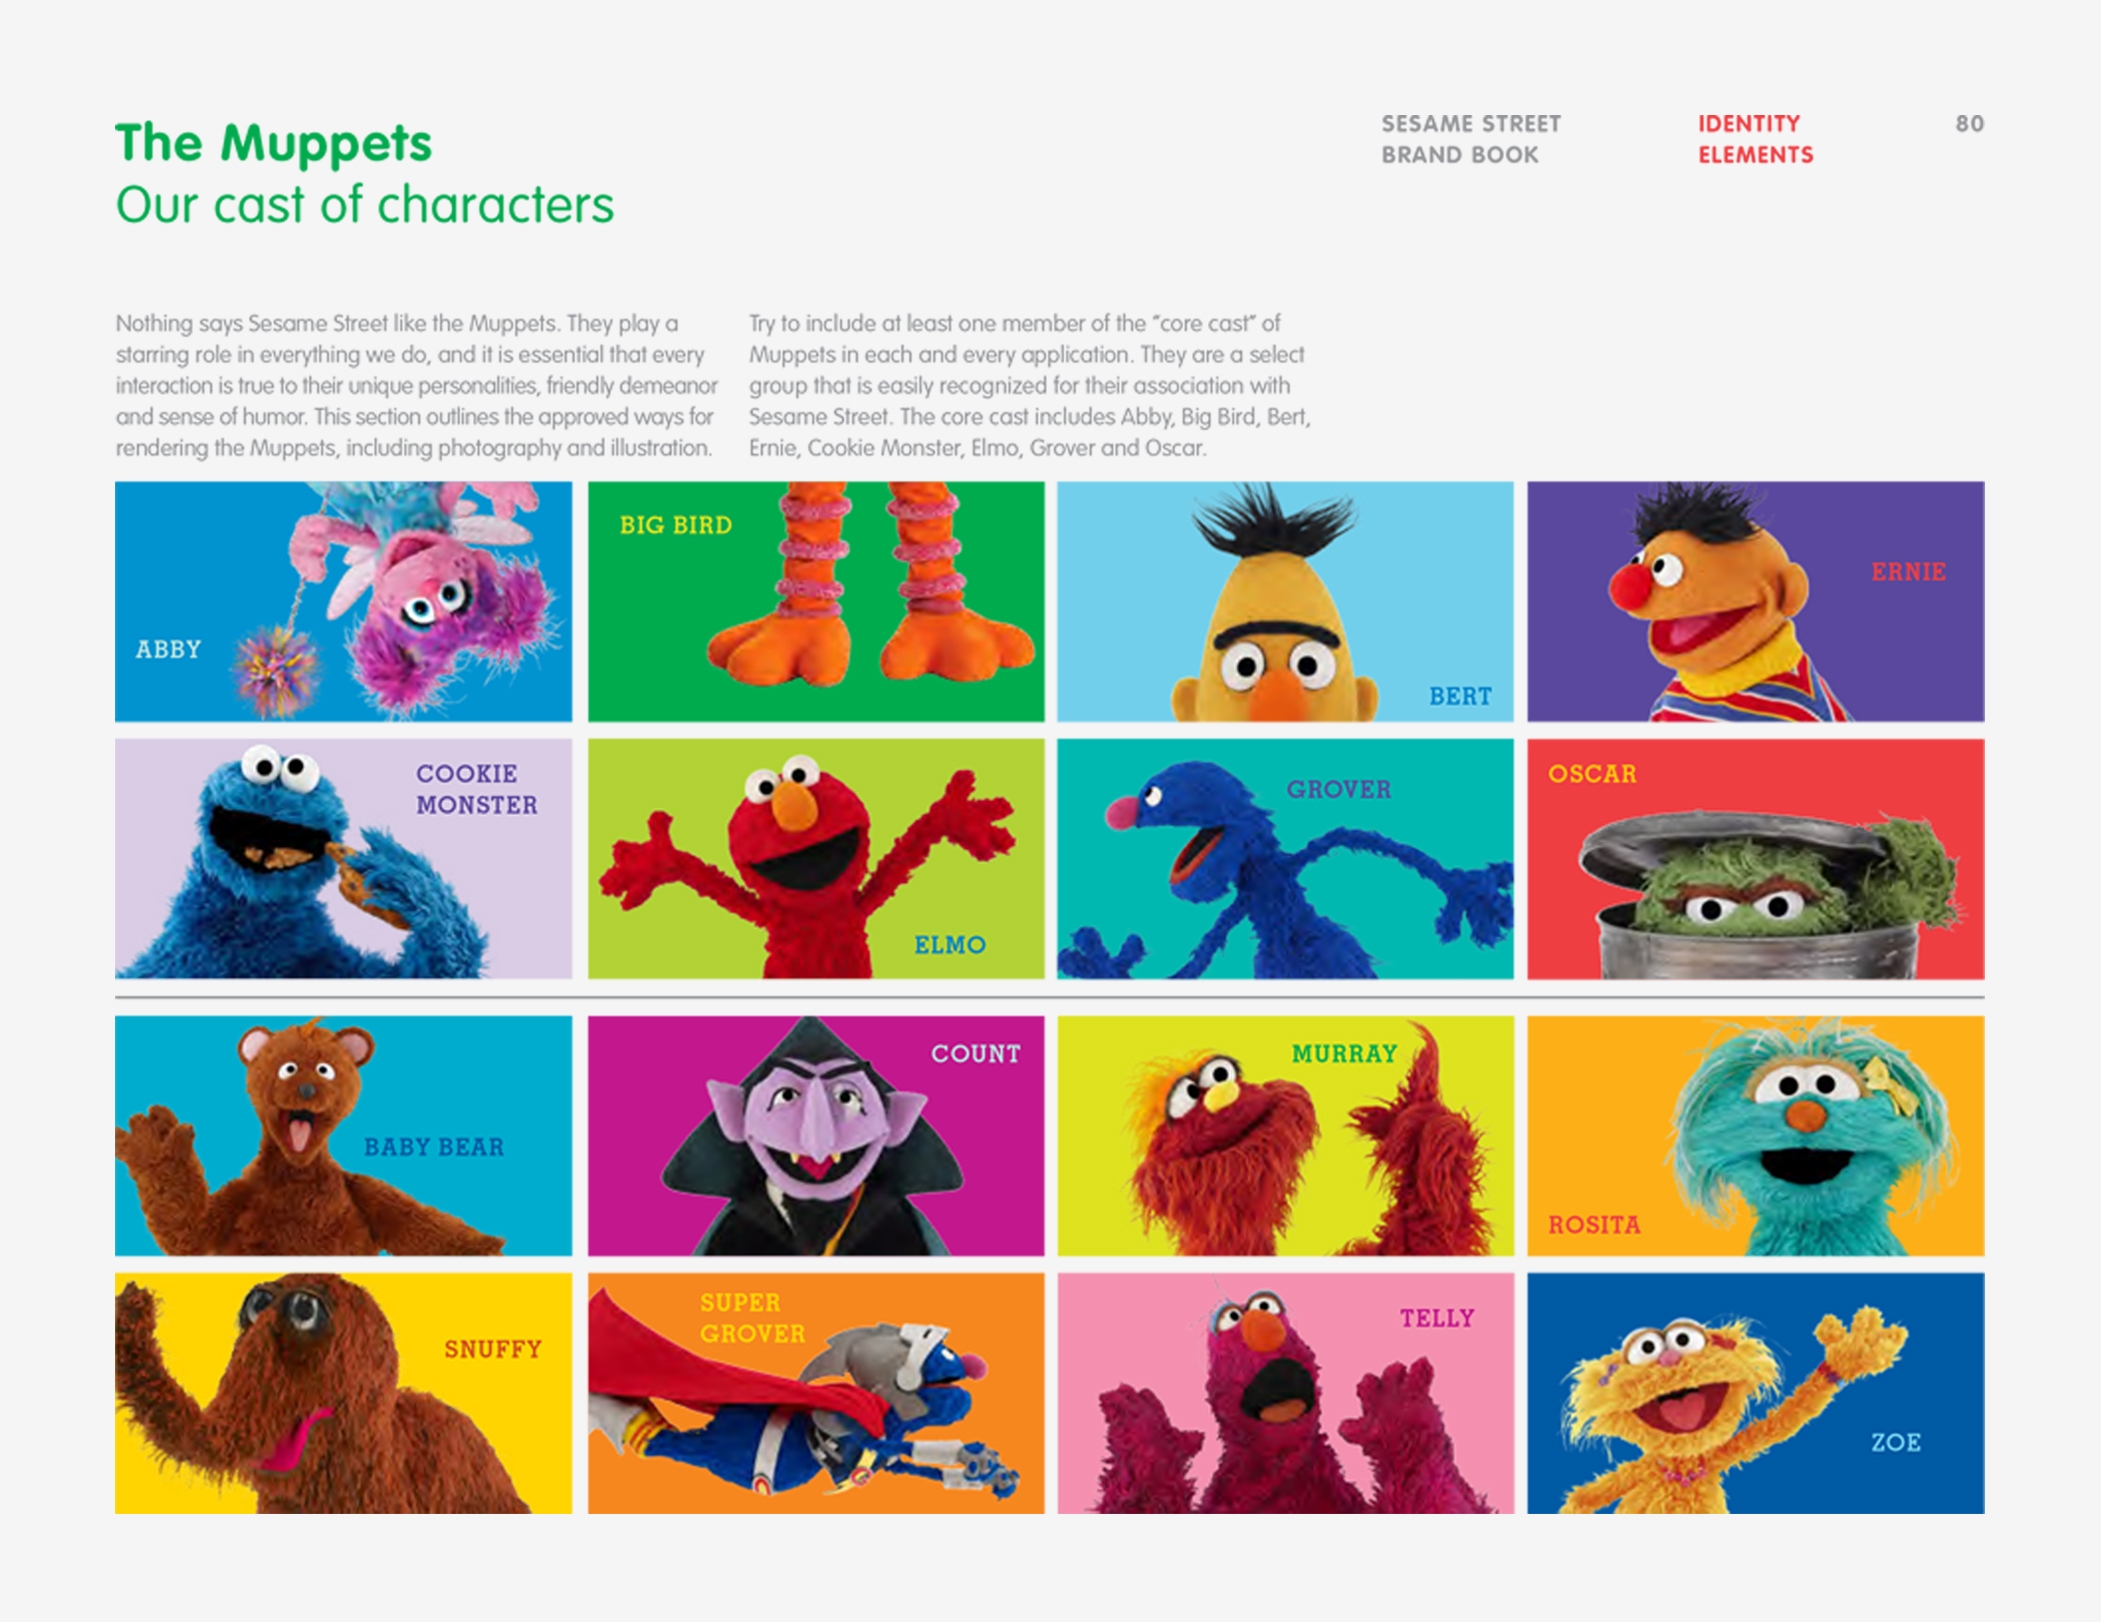 The case of character page from Sesame Workshop Brand Book showing 16 well known muppets, including Elmo and Big Bird.